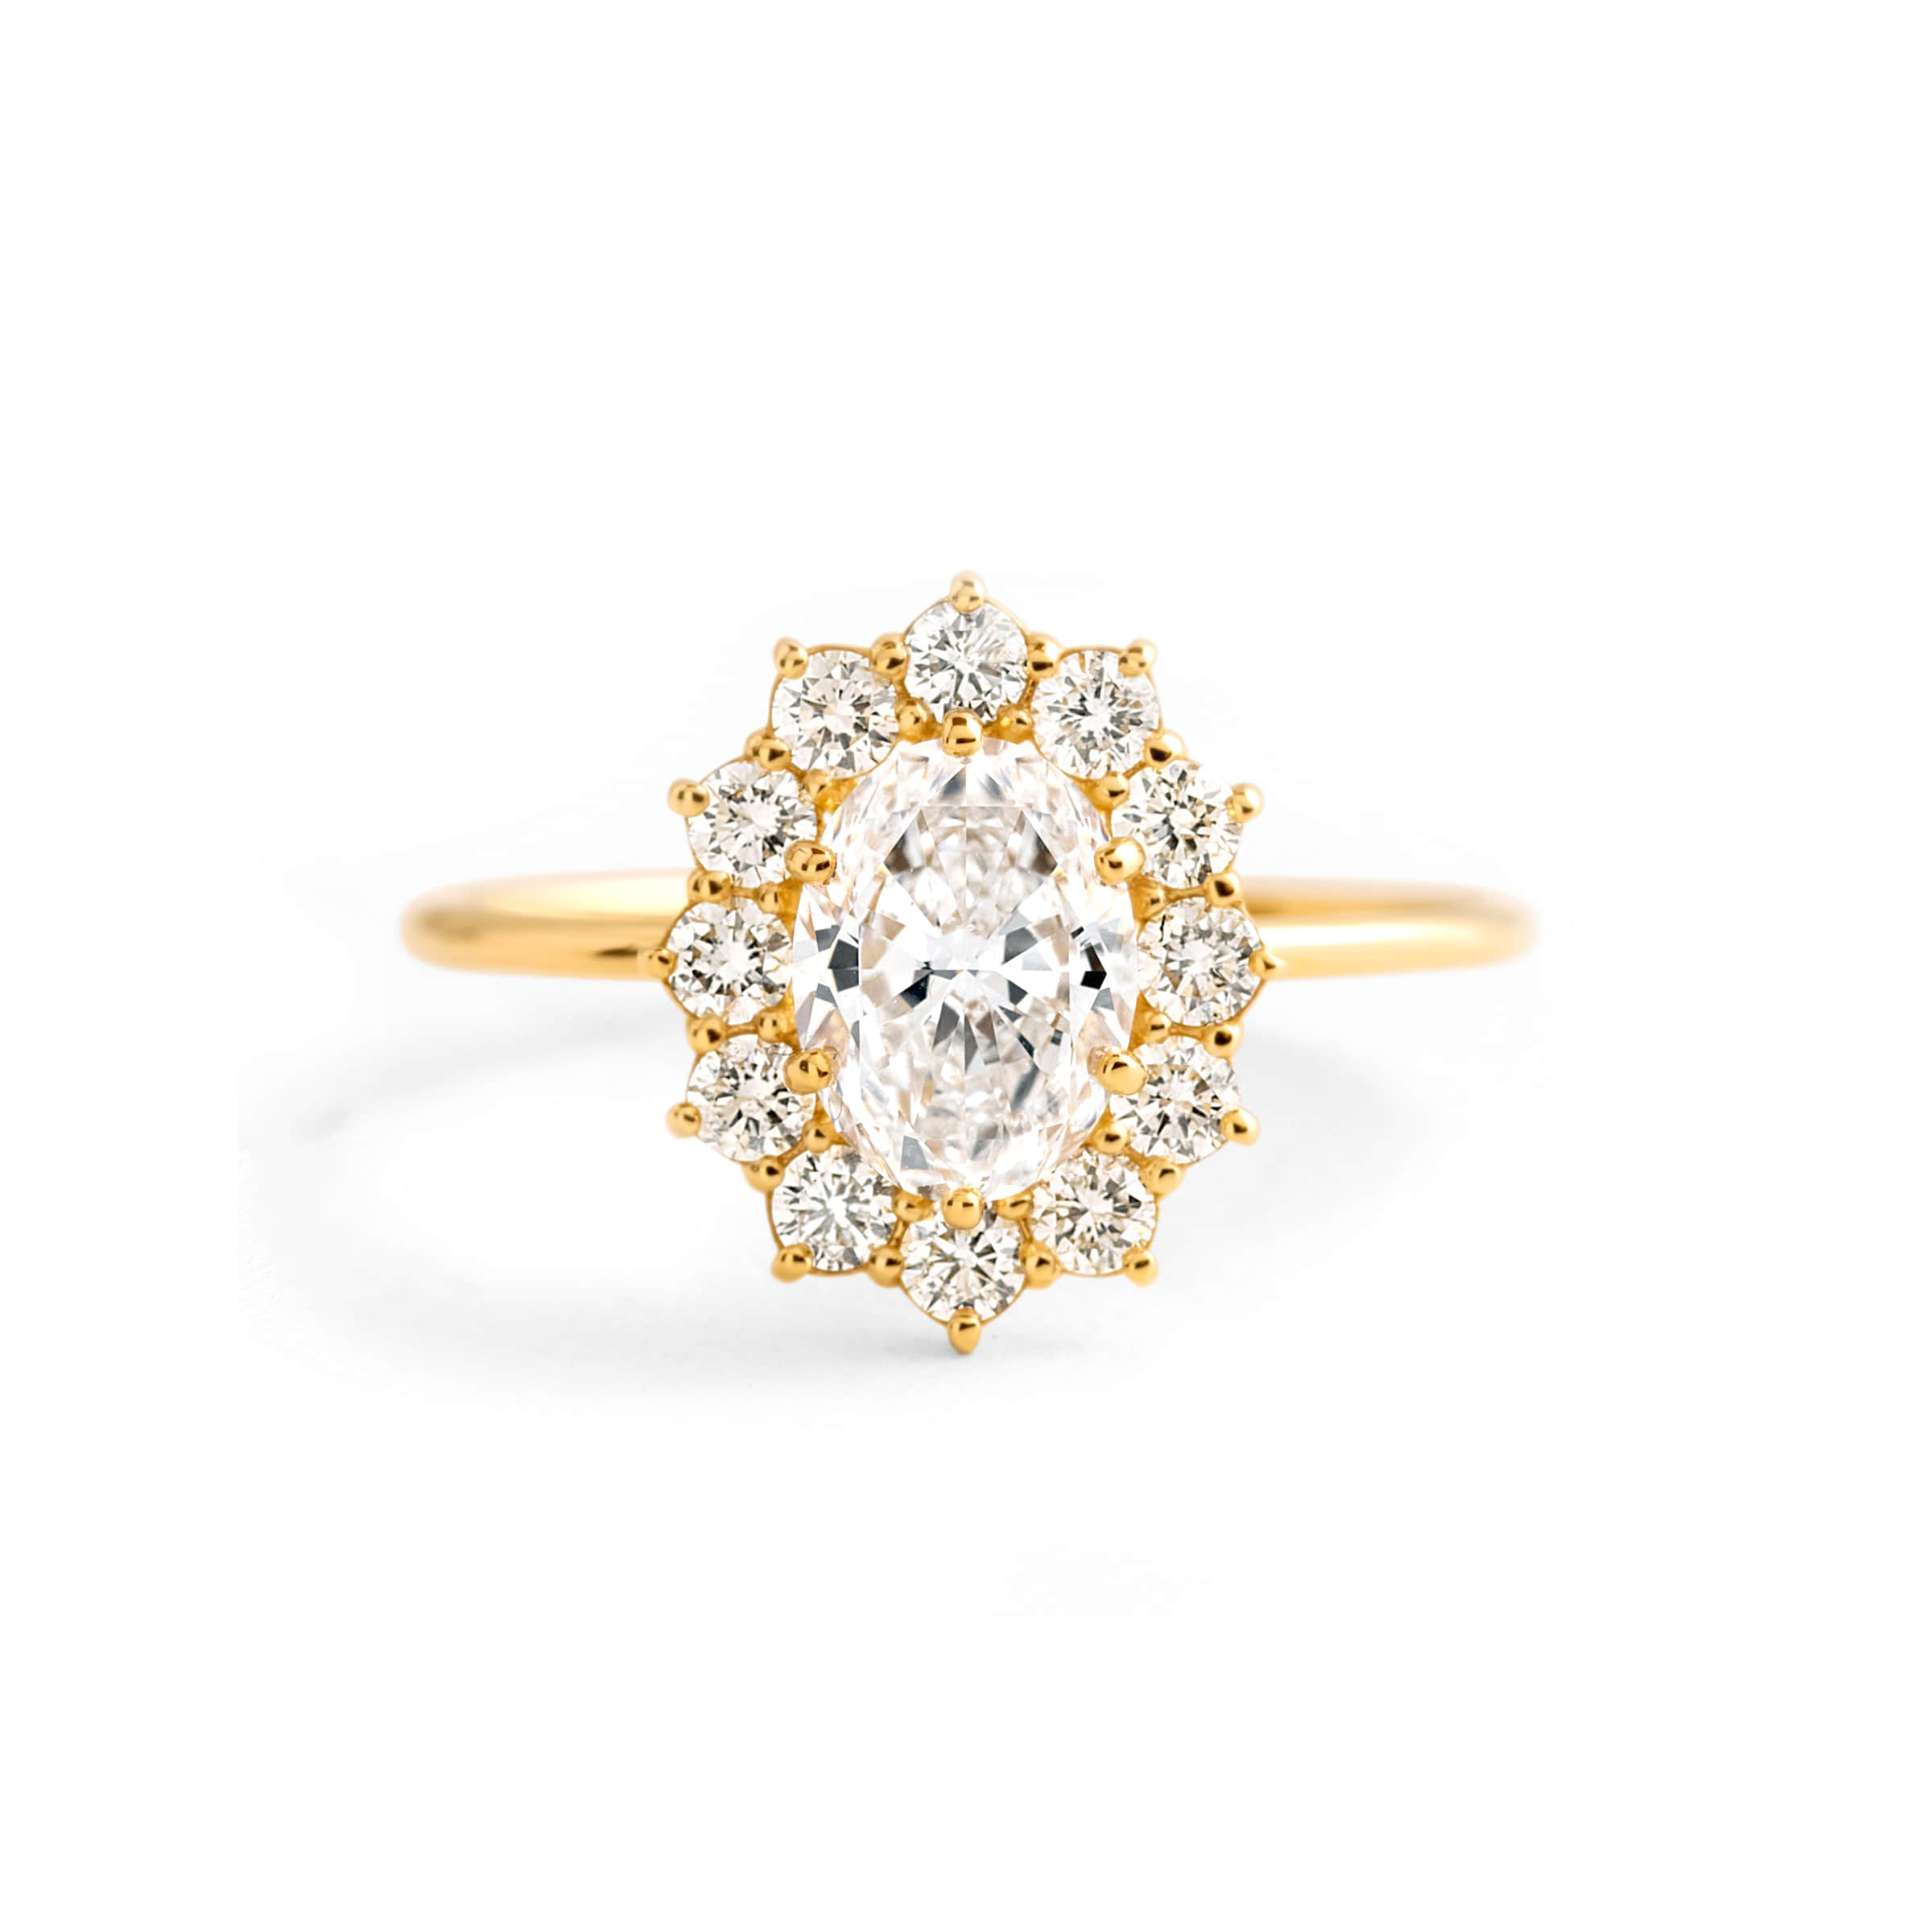 Darry Ring oval cut halo promise ring in yellow gold